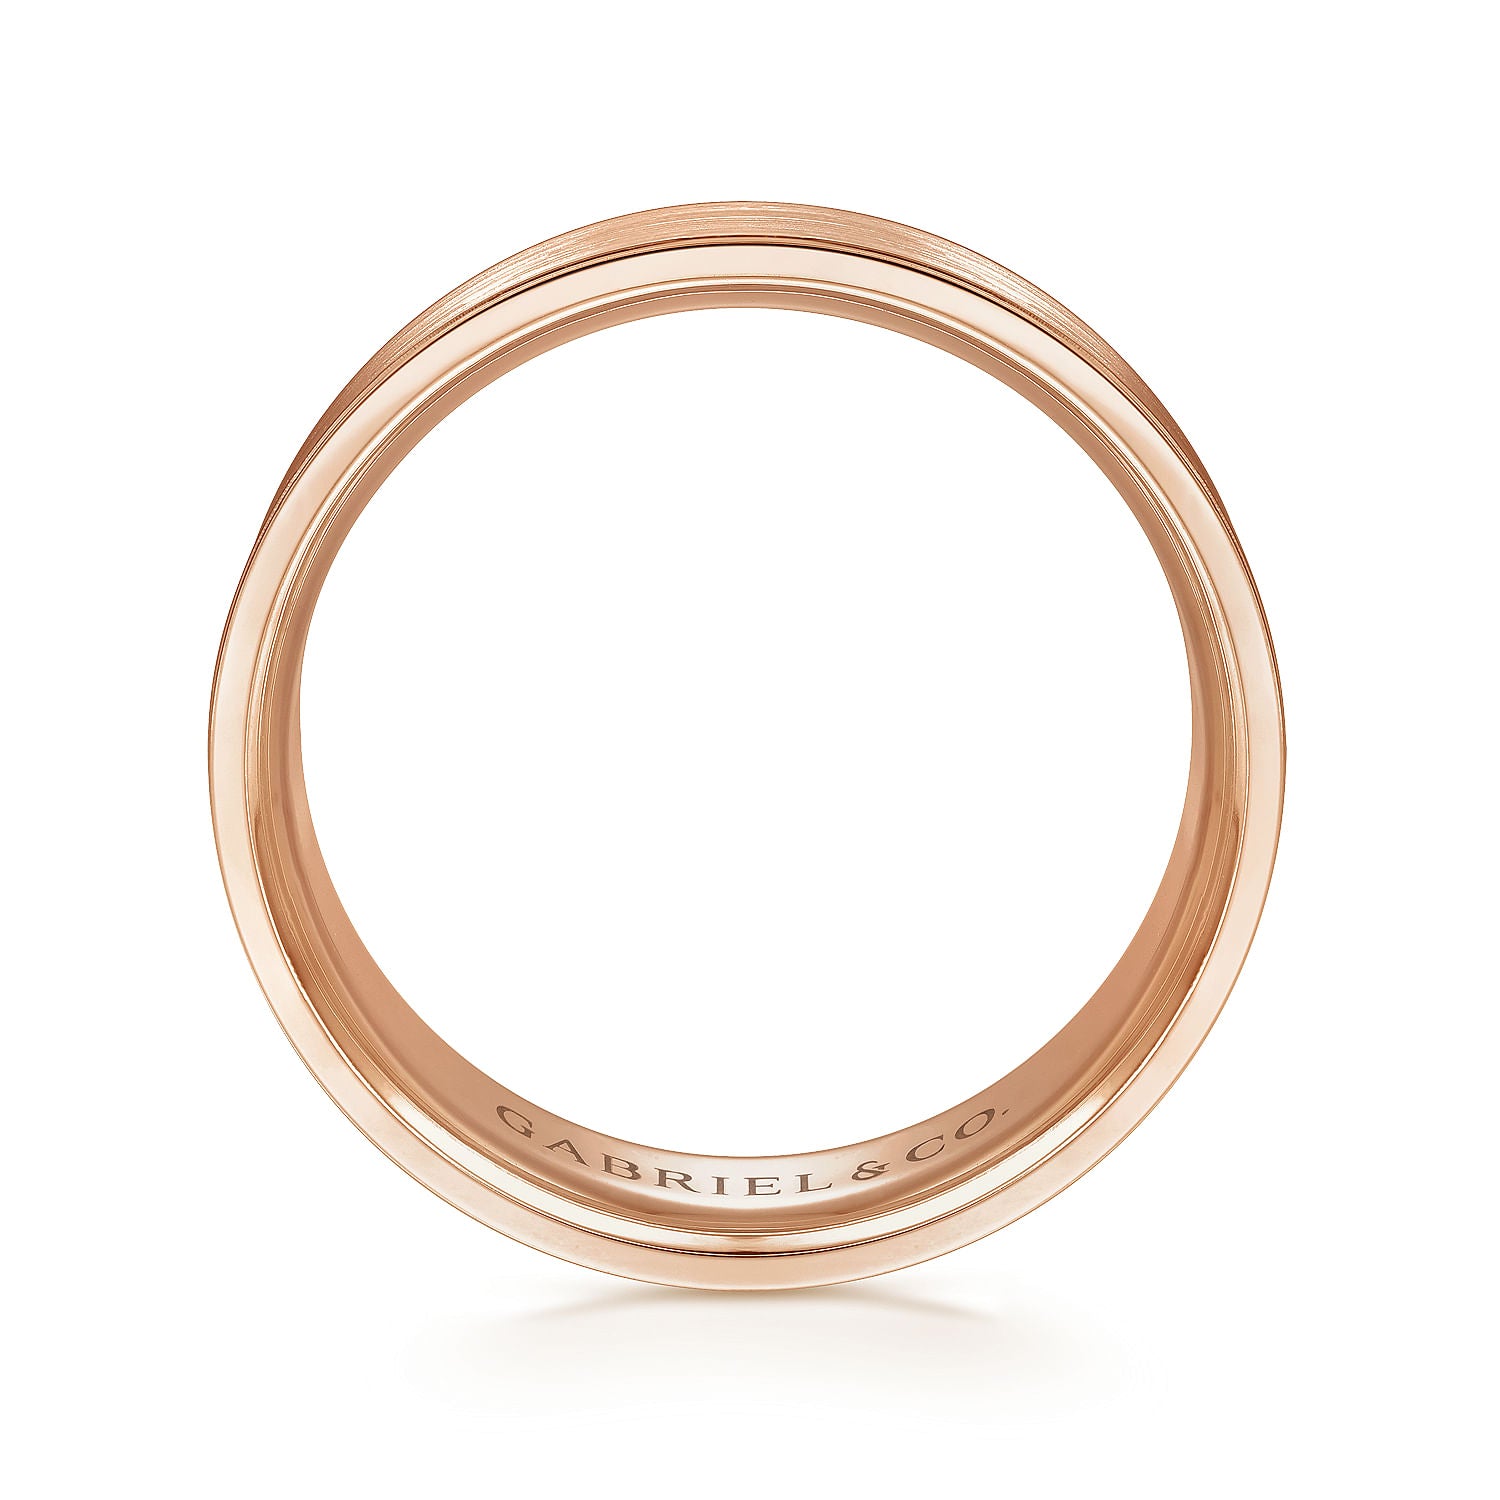 Gabriel & Co Rose Gold Wedding Band With A Satin Center And Polished Beveled Edges - Gold Wedding Bands - Men's